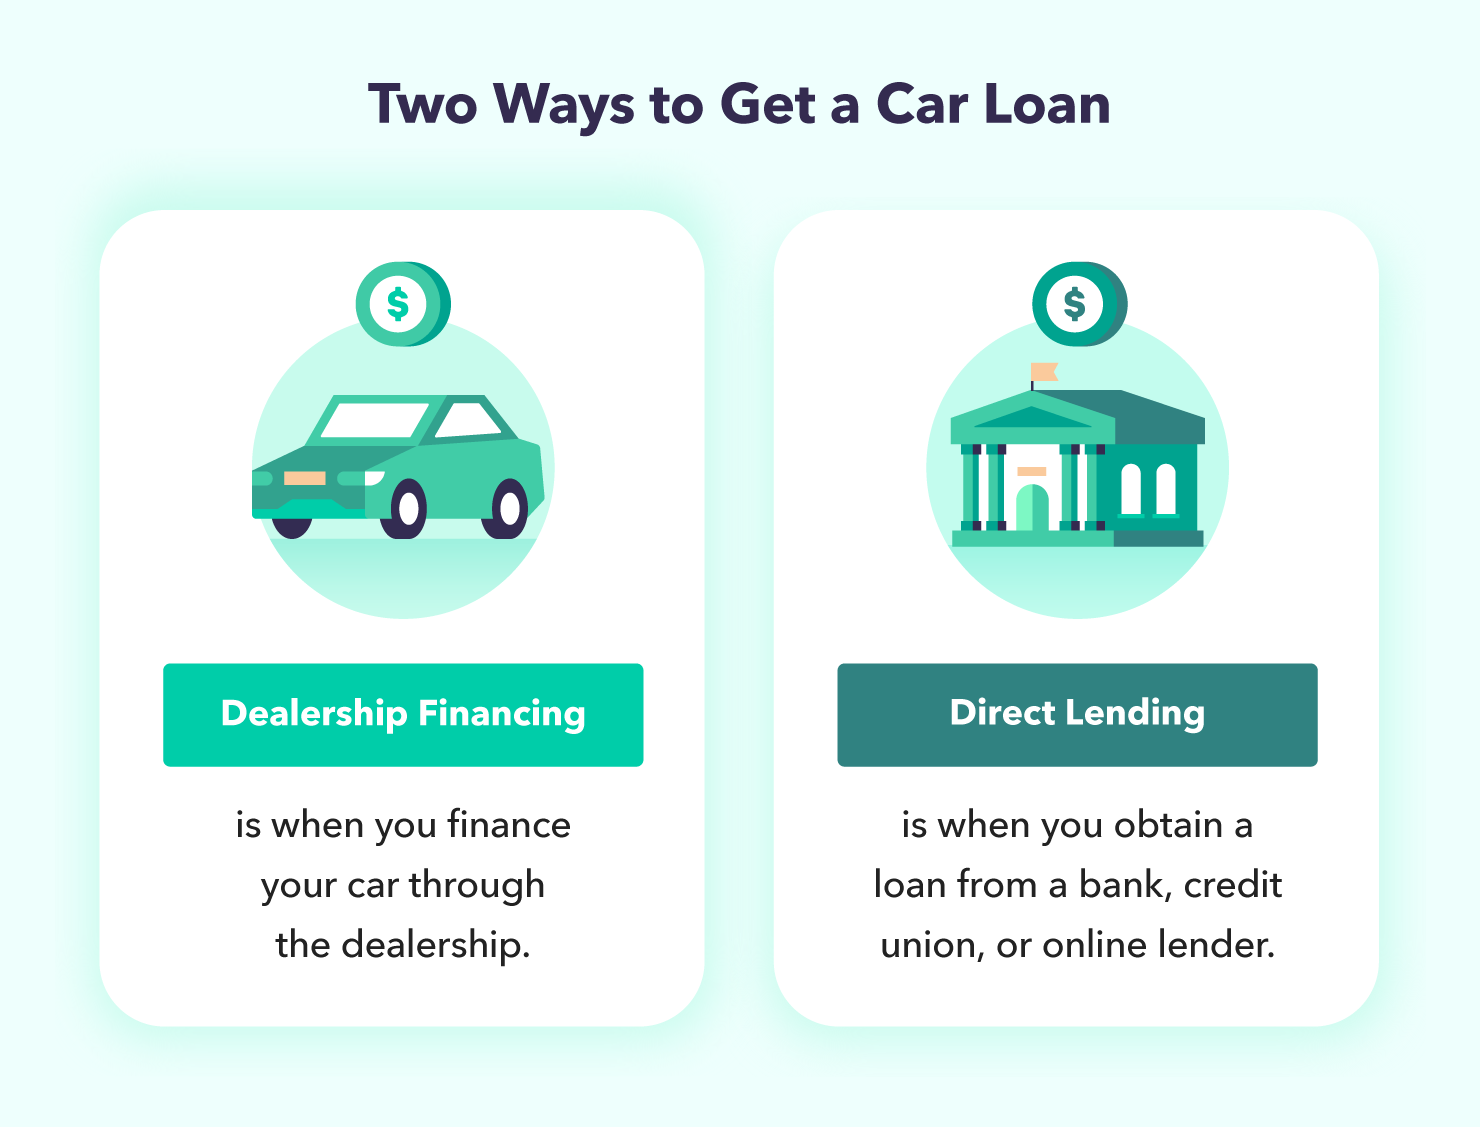 Two ways to get a car loan: dealership financing - is when you finance your car through the dealership or Direct lending - is when you obtain a loan from a bank, credit union, or online lender.